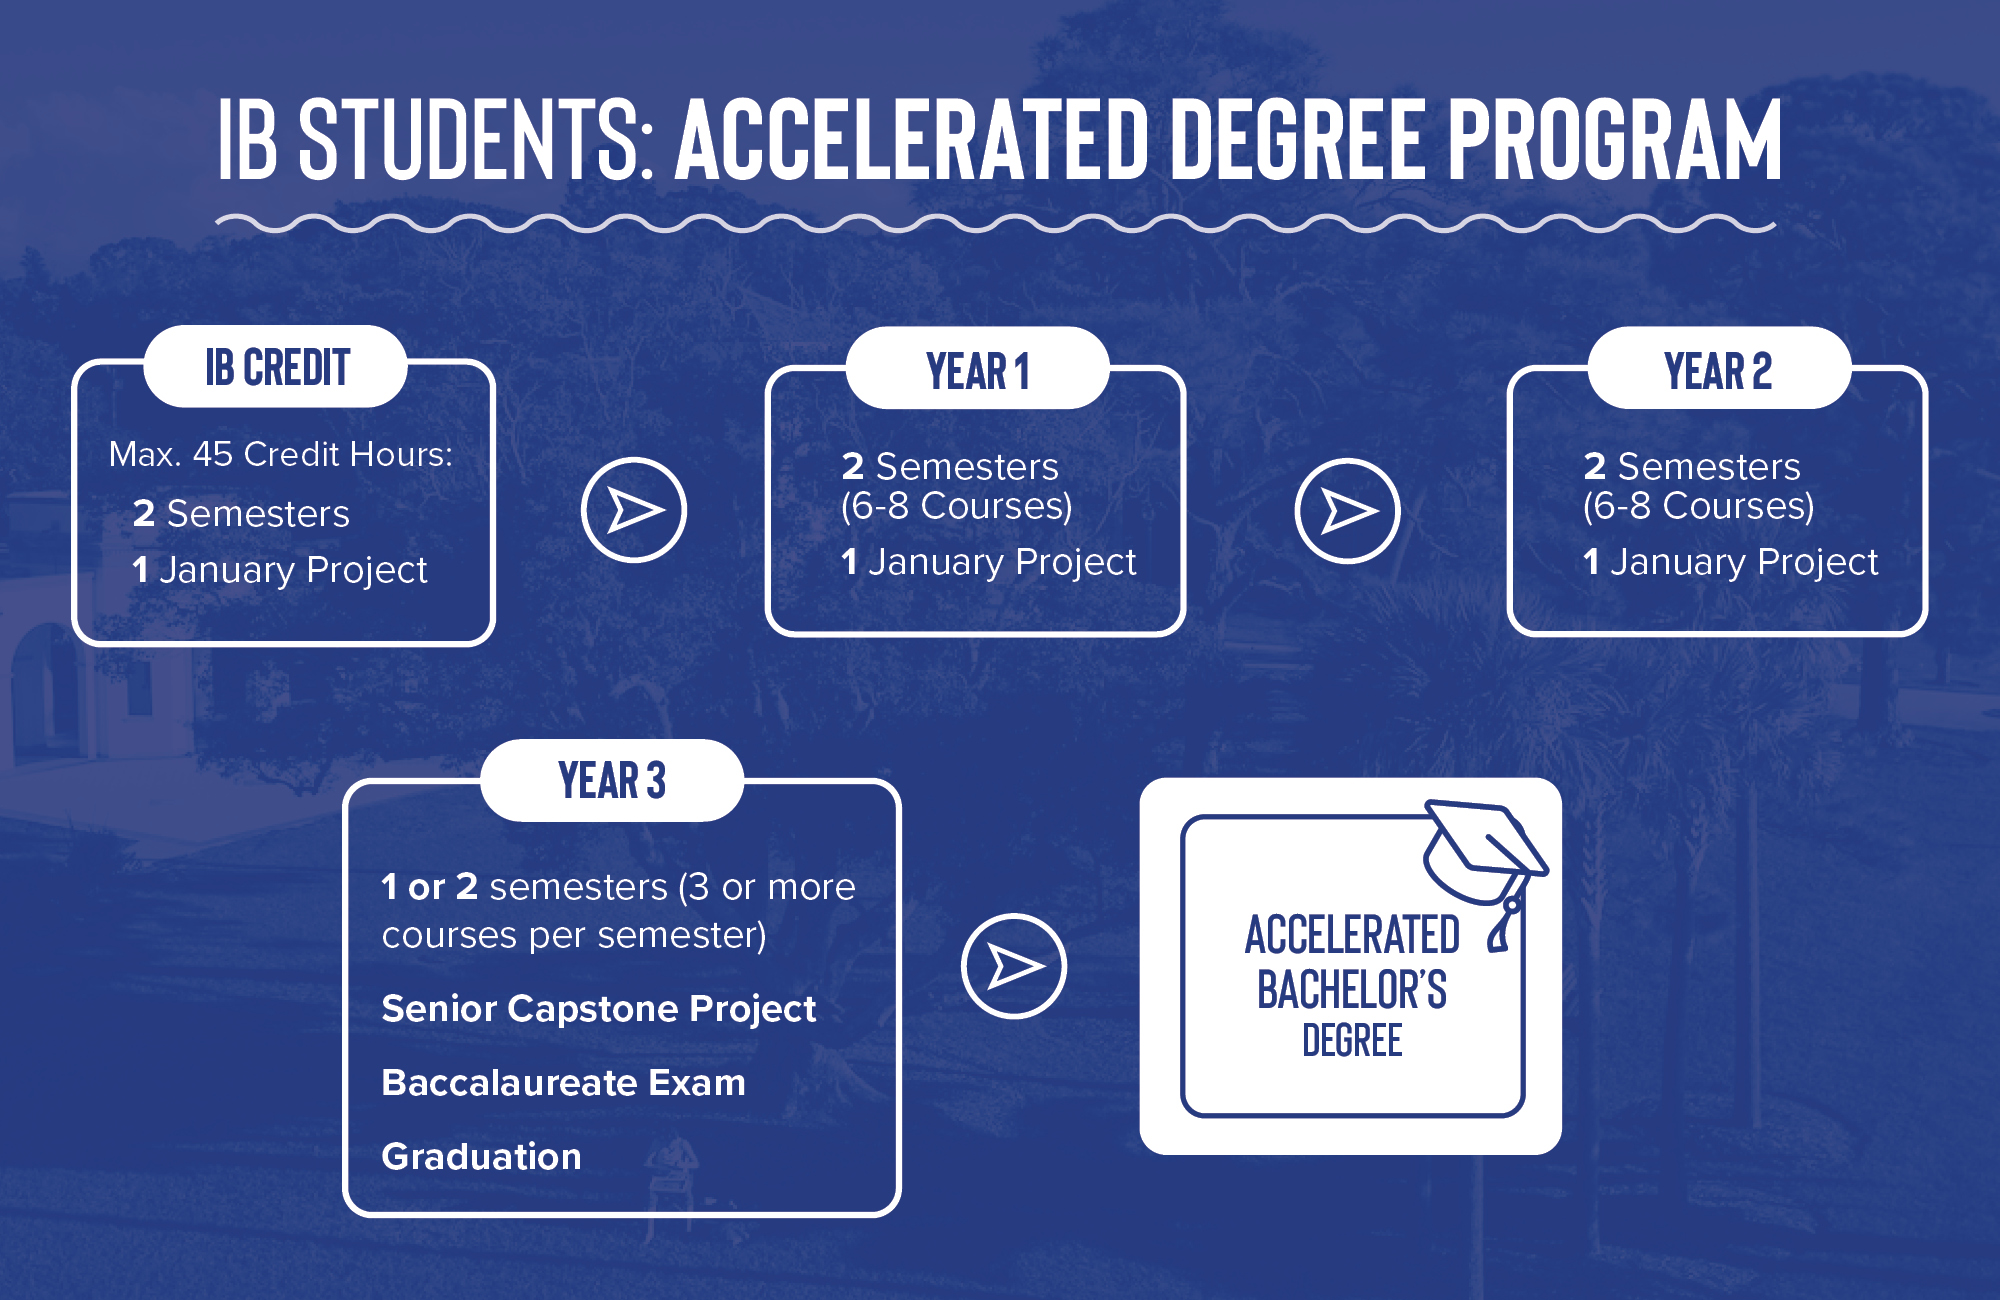 Graphic detailing IB Students accelerated degree program